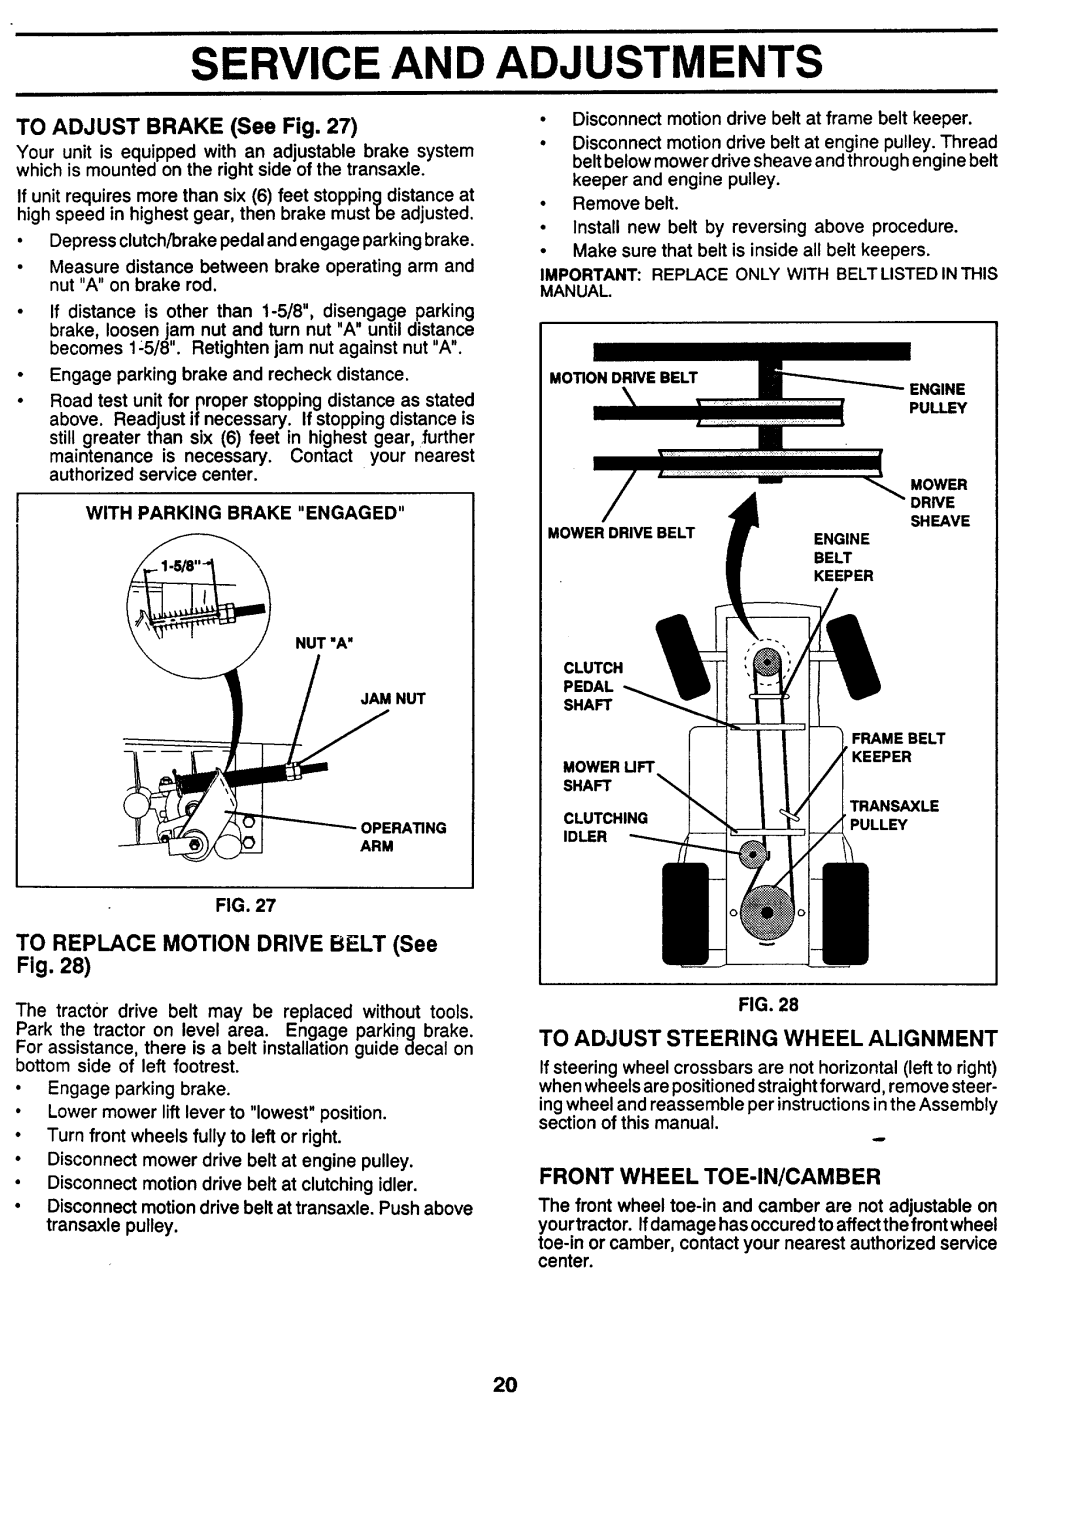 Sears 917.257462 TO ADJUST BRAKE See Fig, Keeper, TO REPLACE MOTION DRIVE BELT See Fig, To Adjust Steering Wheel Alignment 